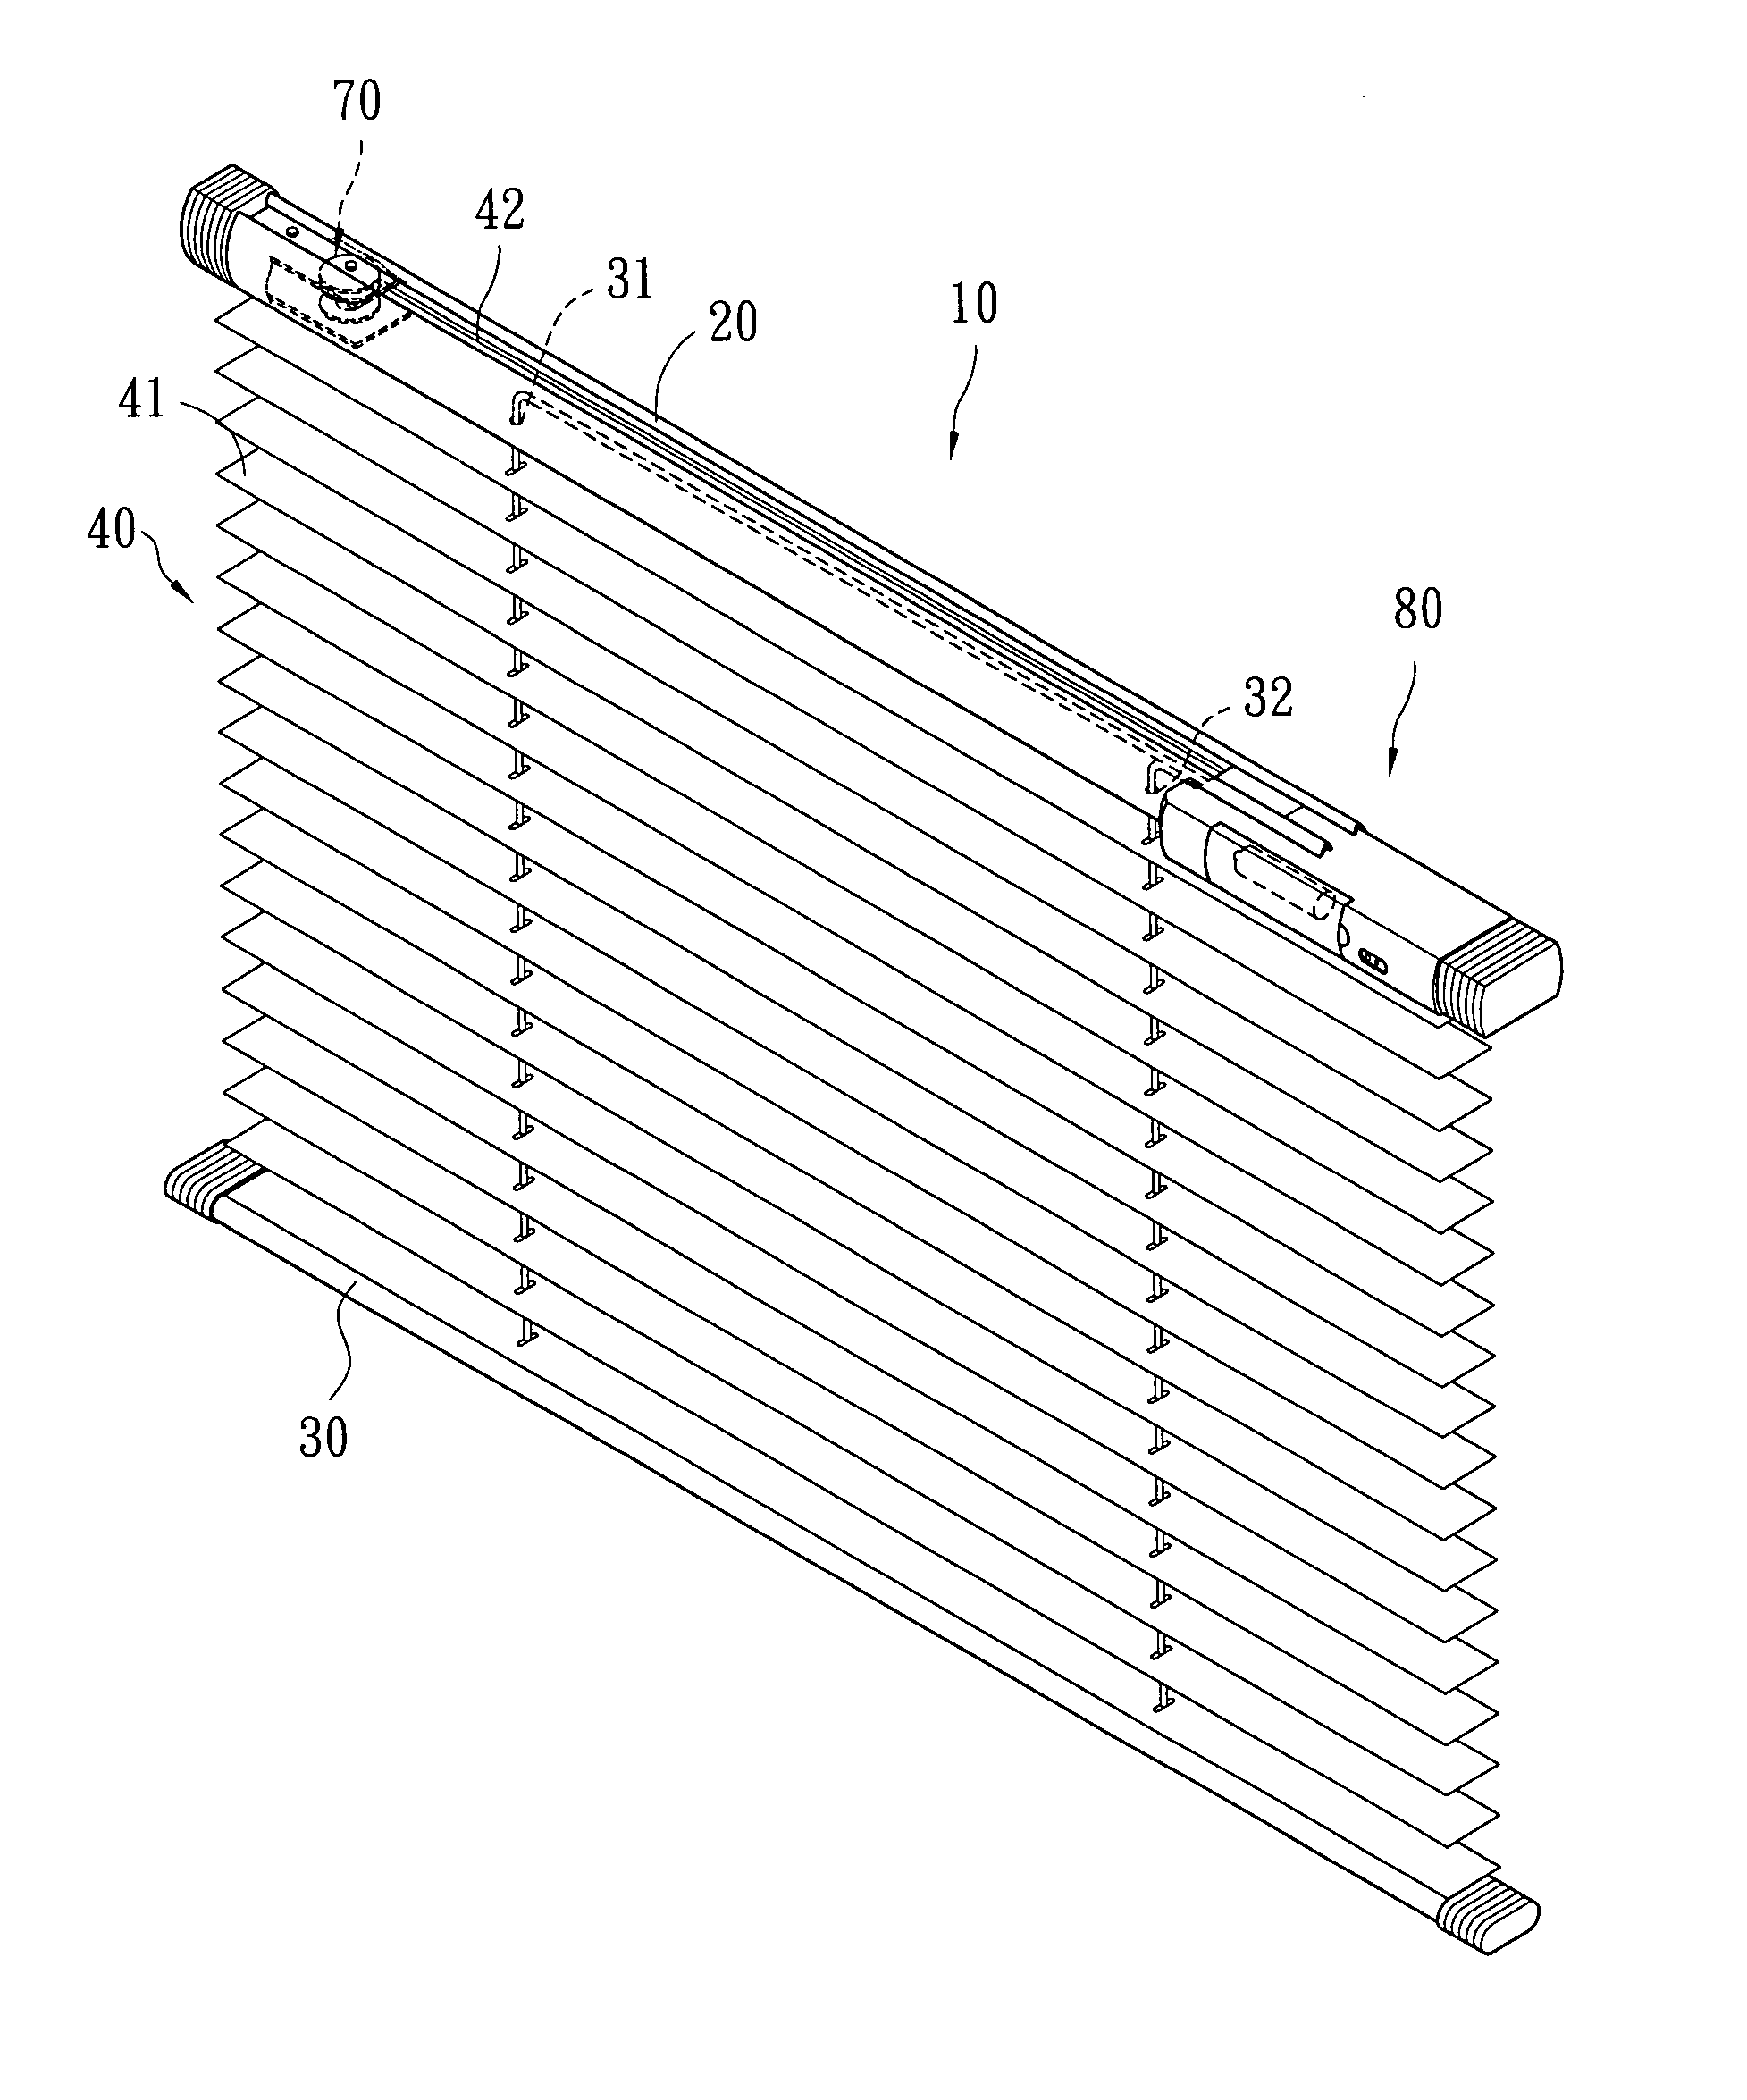 Window covering switchable to manual operation and electrical operation and a clutch thereof